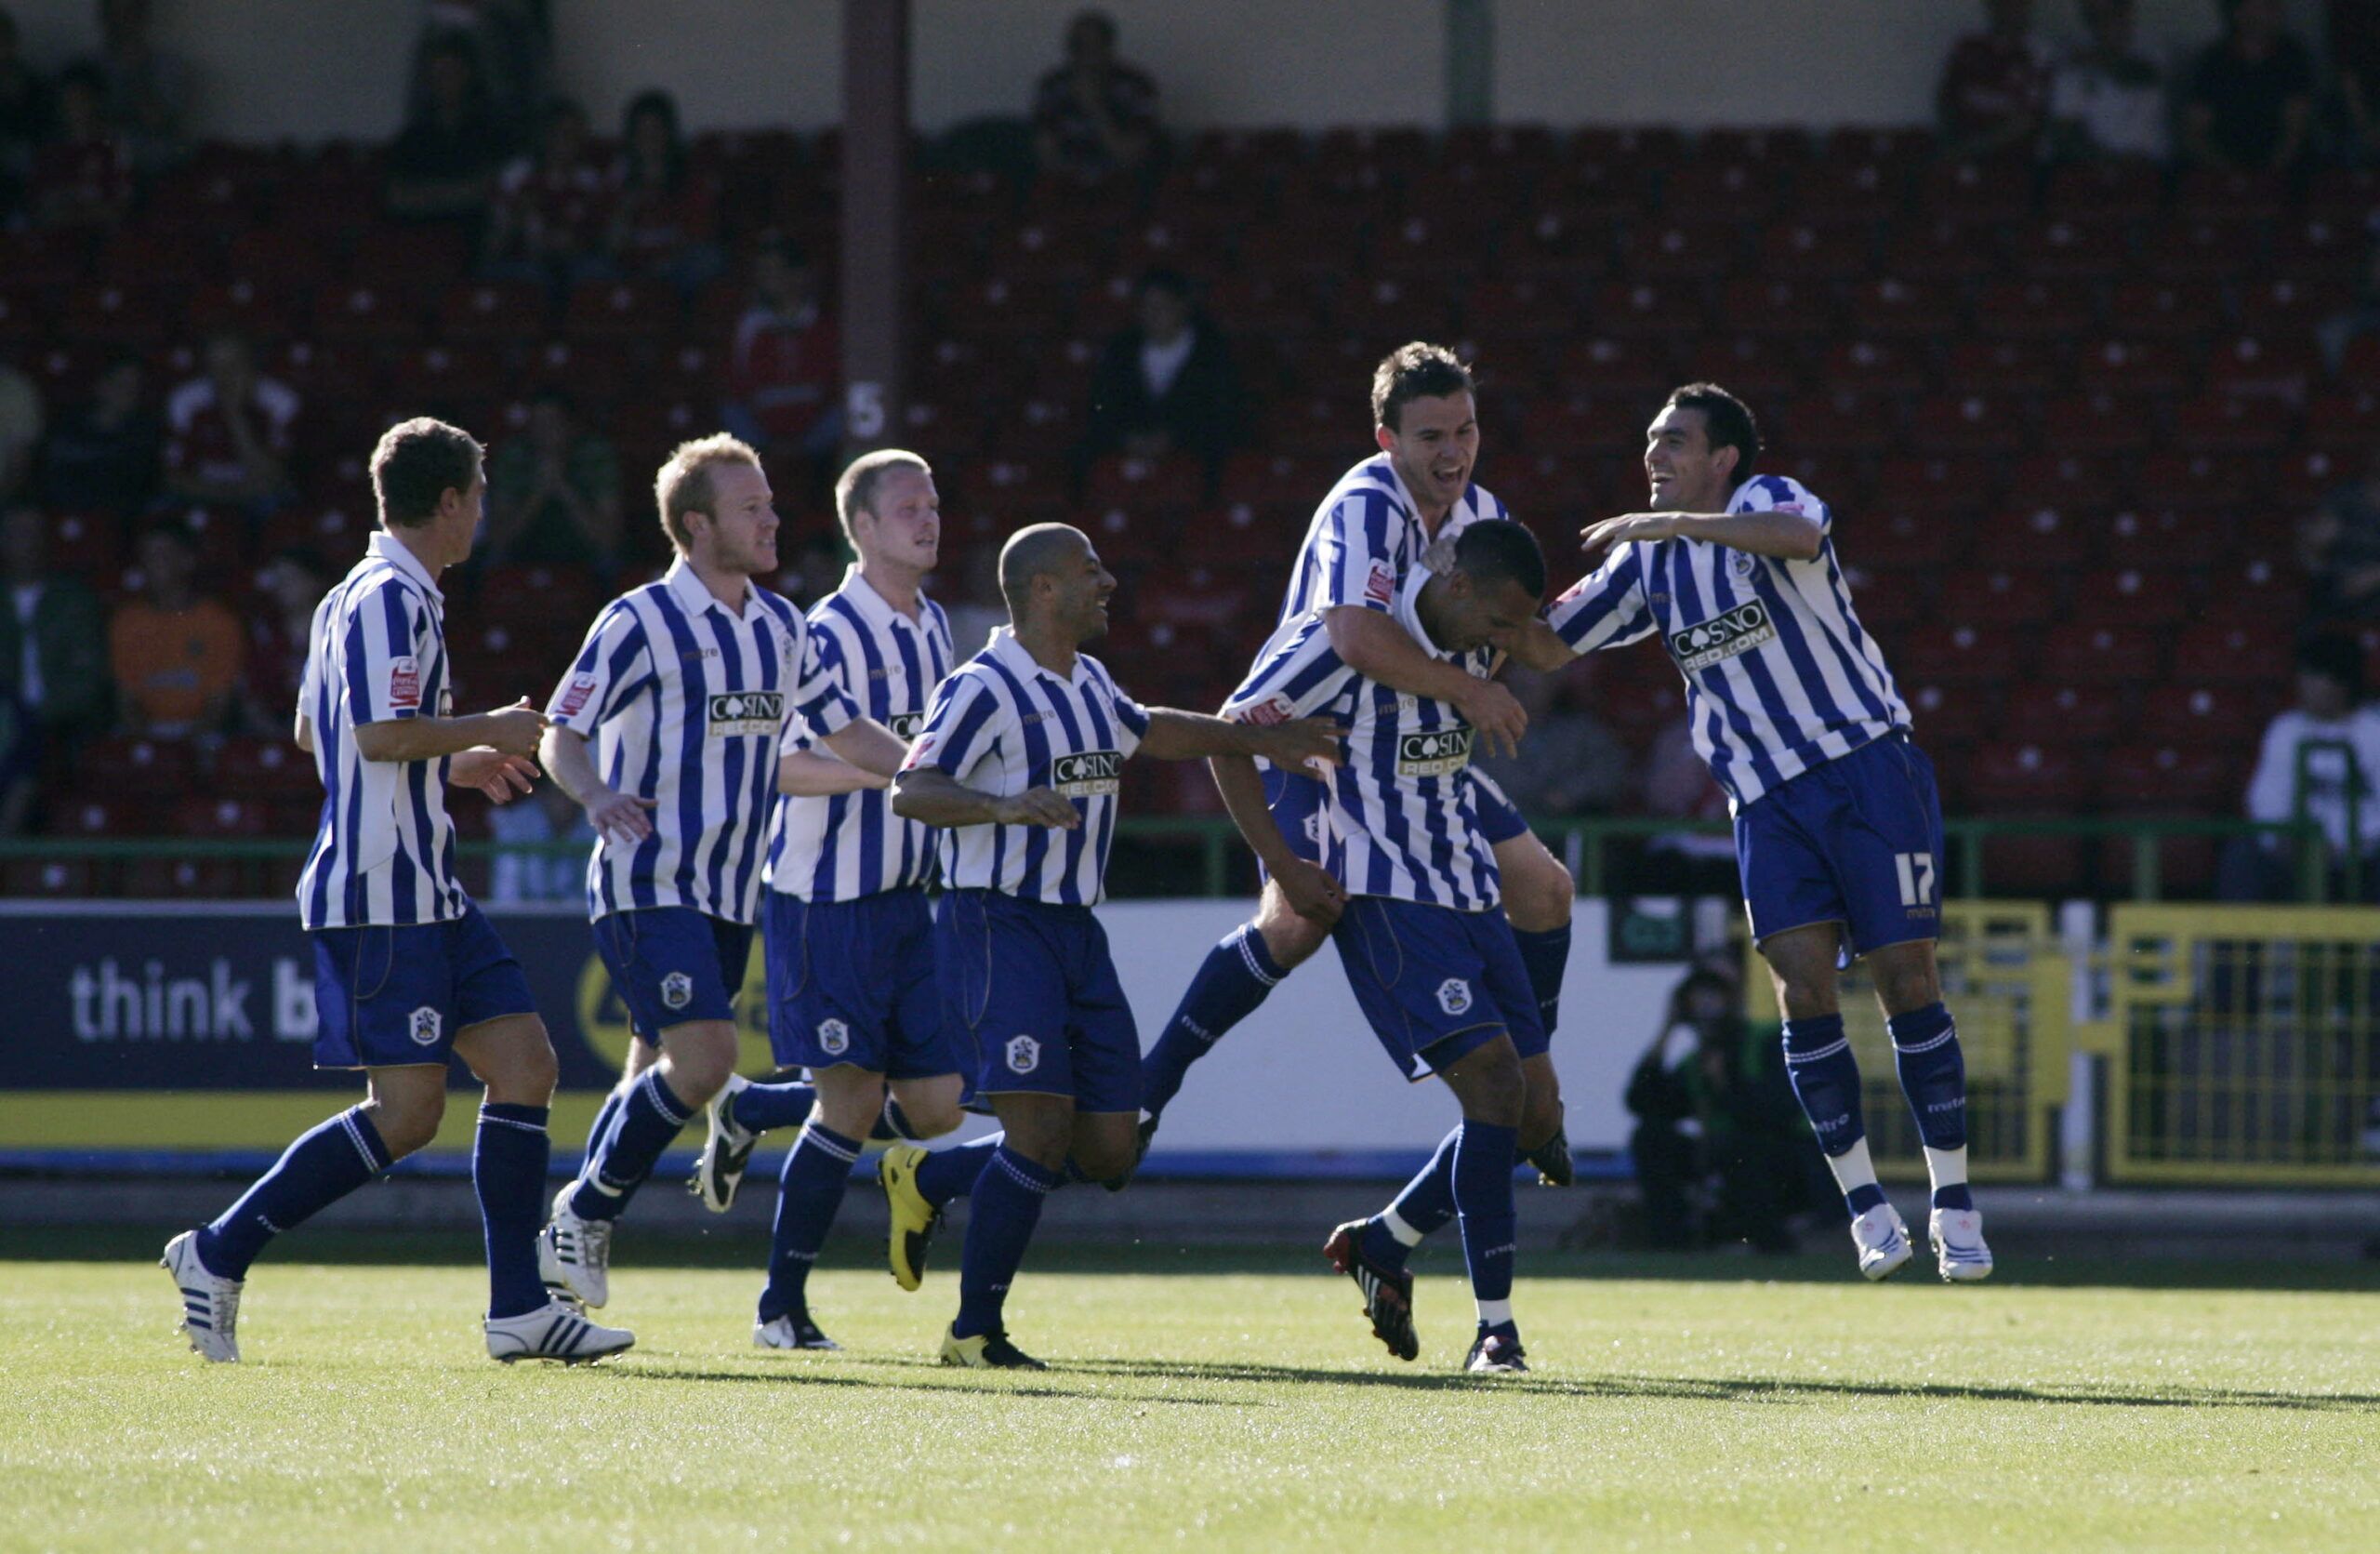 Football - Swindon Town v Huddersfield Town Coca-Cola Football League One - The County Ground - 11/10/08 
Liam Dickinson (2nd R) celebrates scoring the first goal for Huddersfield Town with team mates 
Mandatory Credit: Action Images / Peter Cziborra 
Livepic